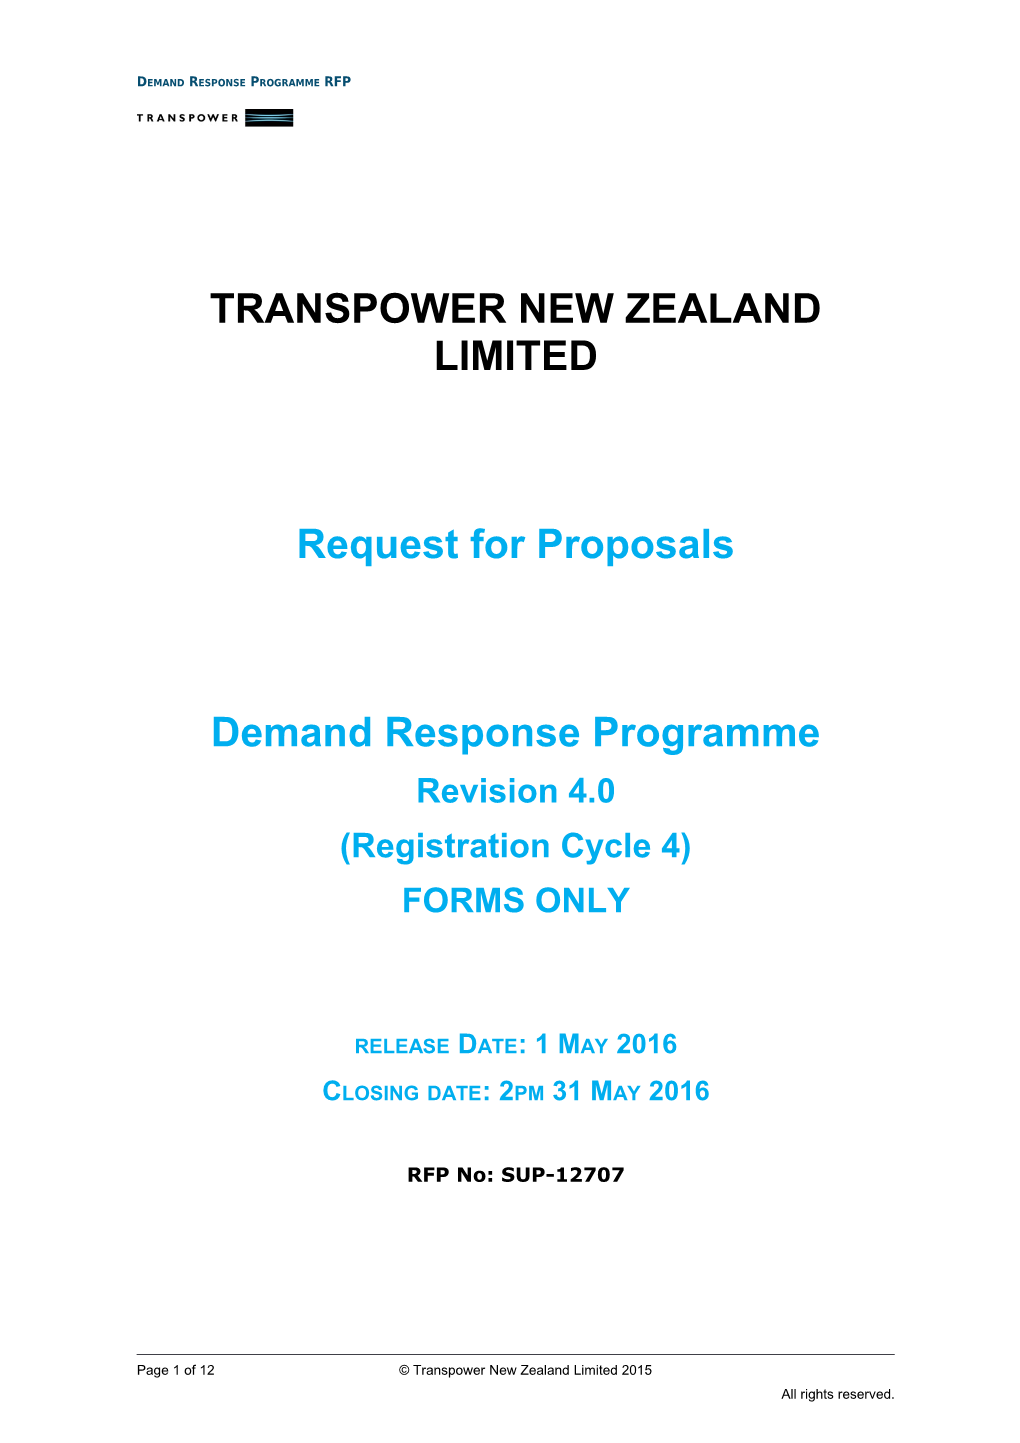 DR Programme - RFP FORMS ONLY - 2015 Registration Cycle 4